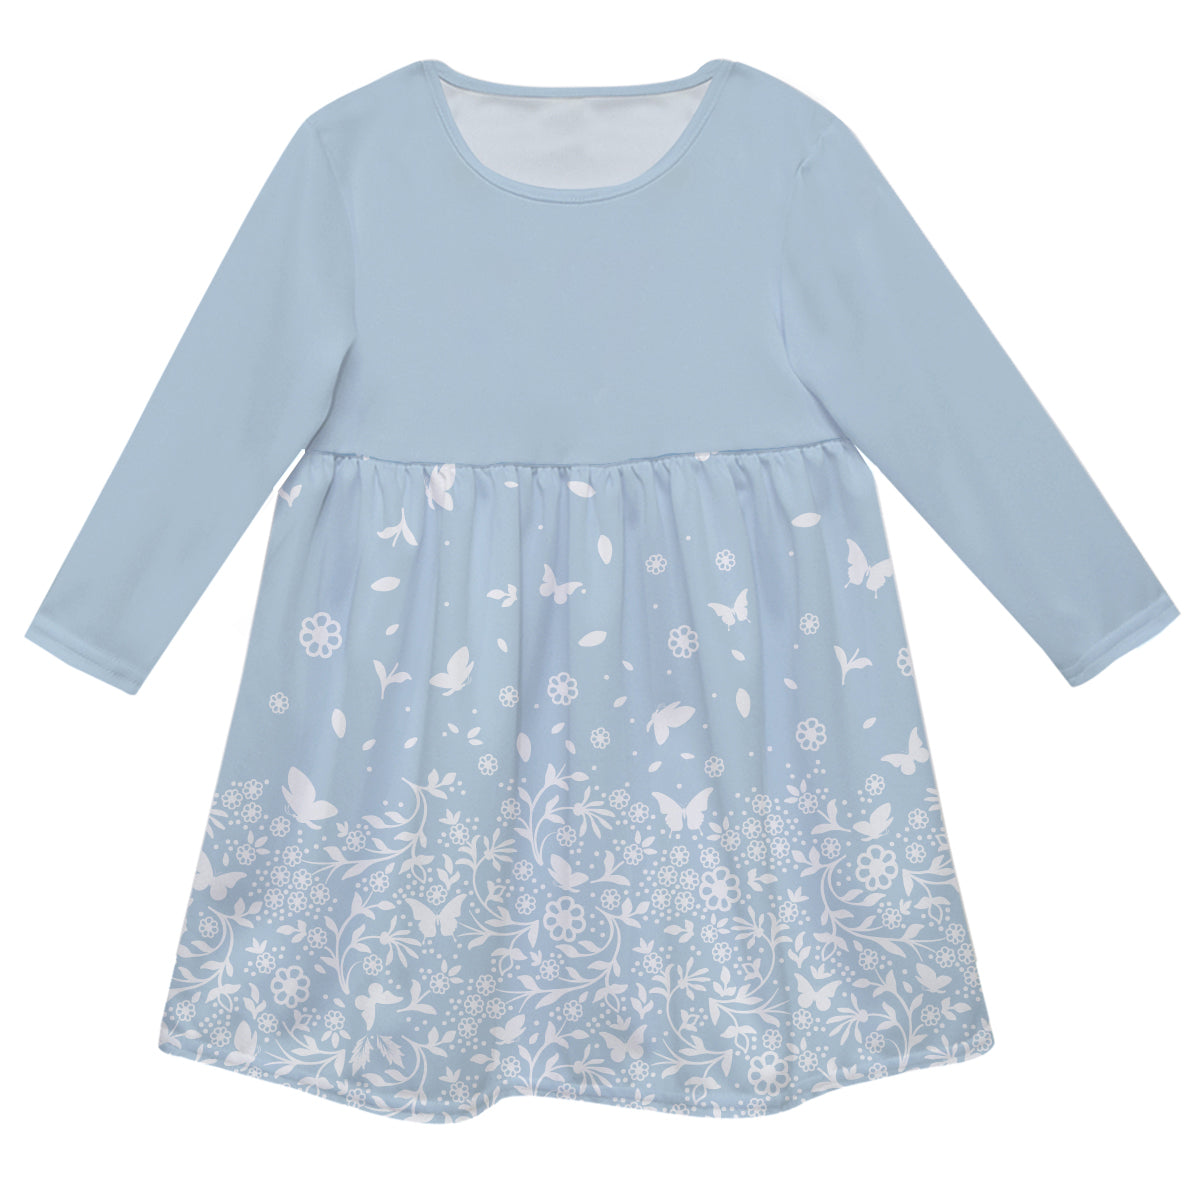 Girls blue and white dress with name - Wimziy&Co.